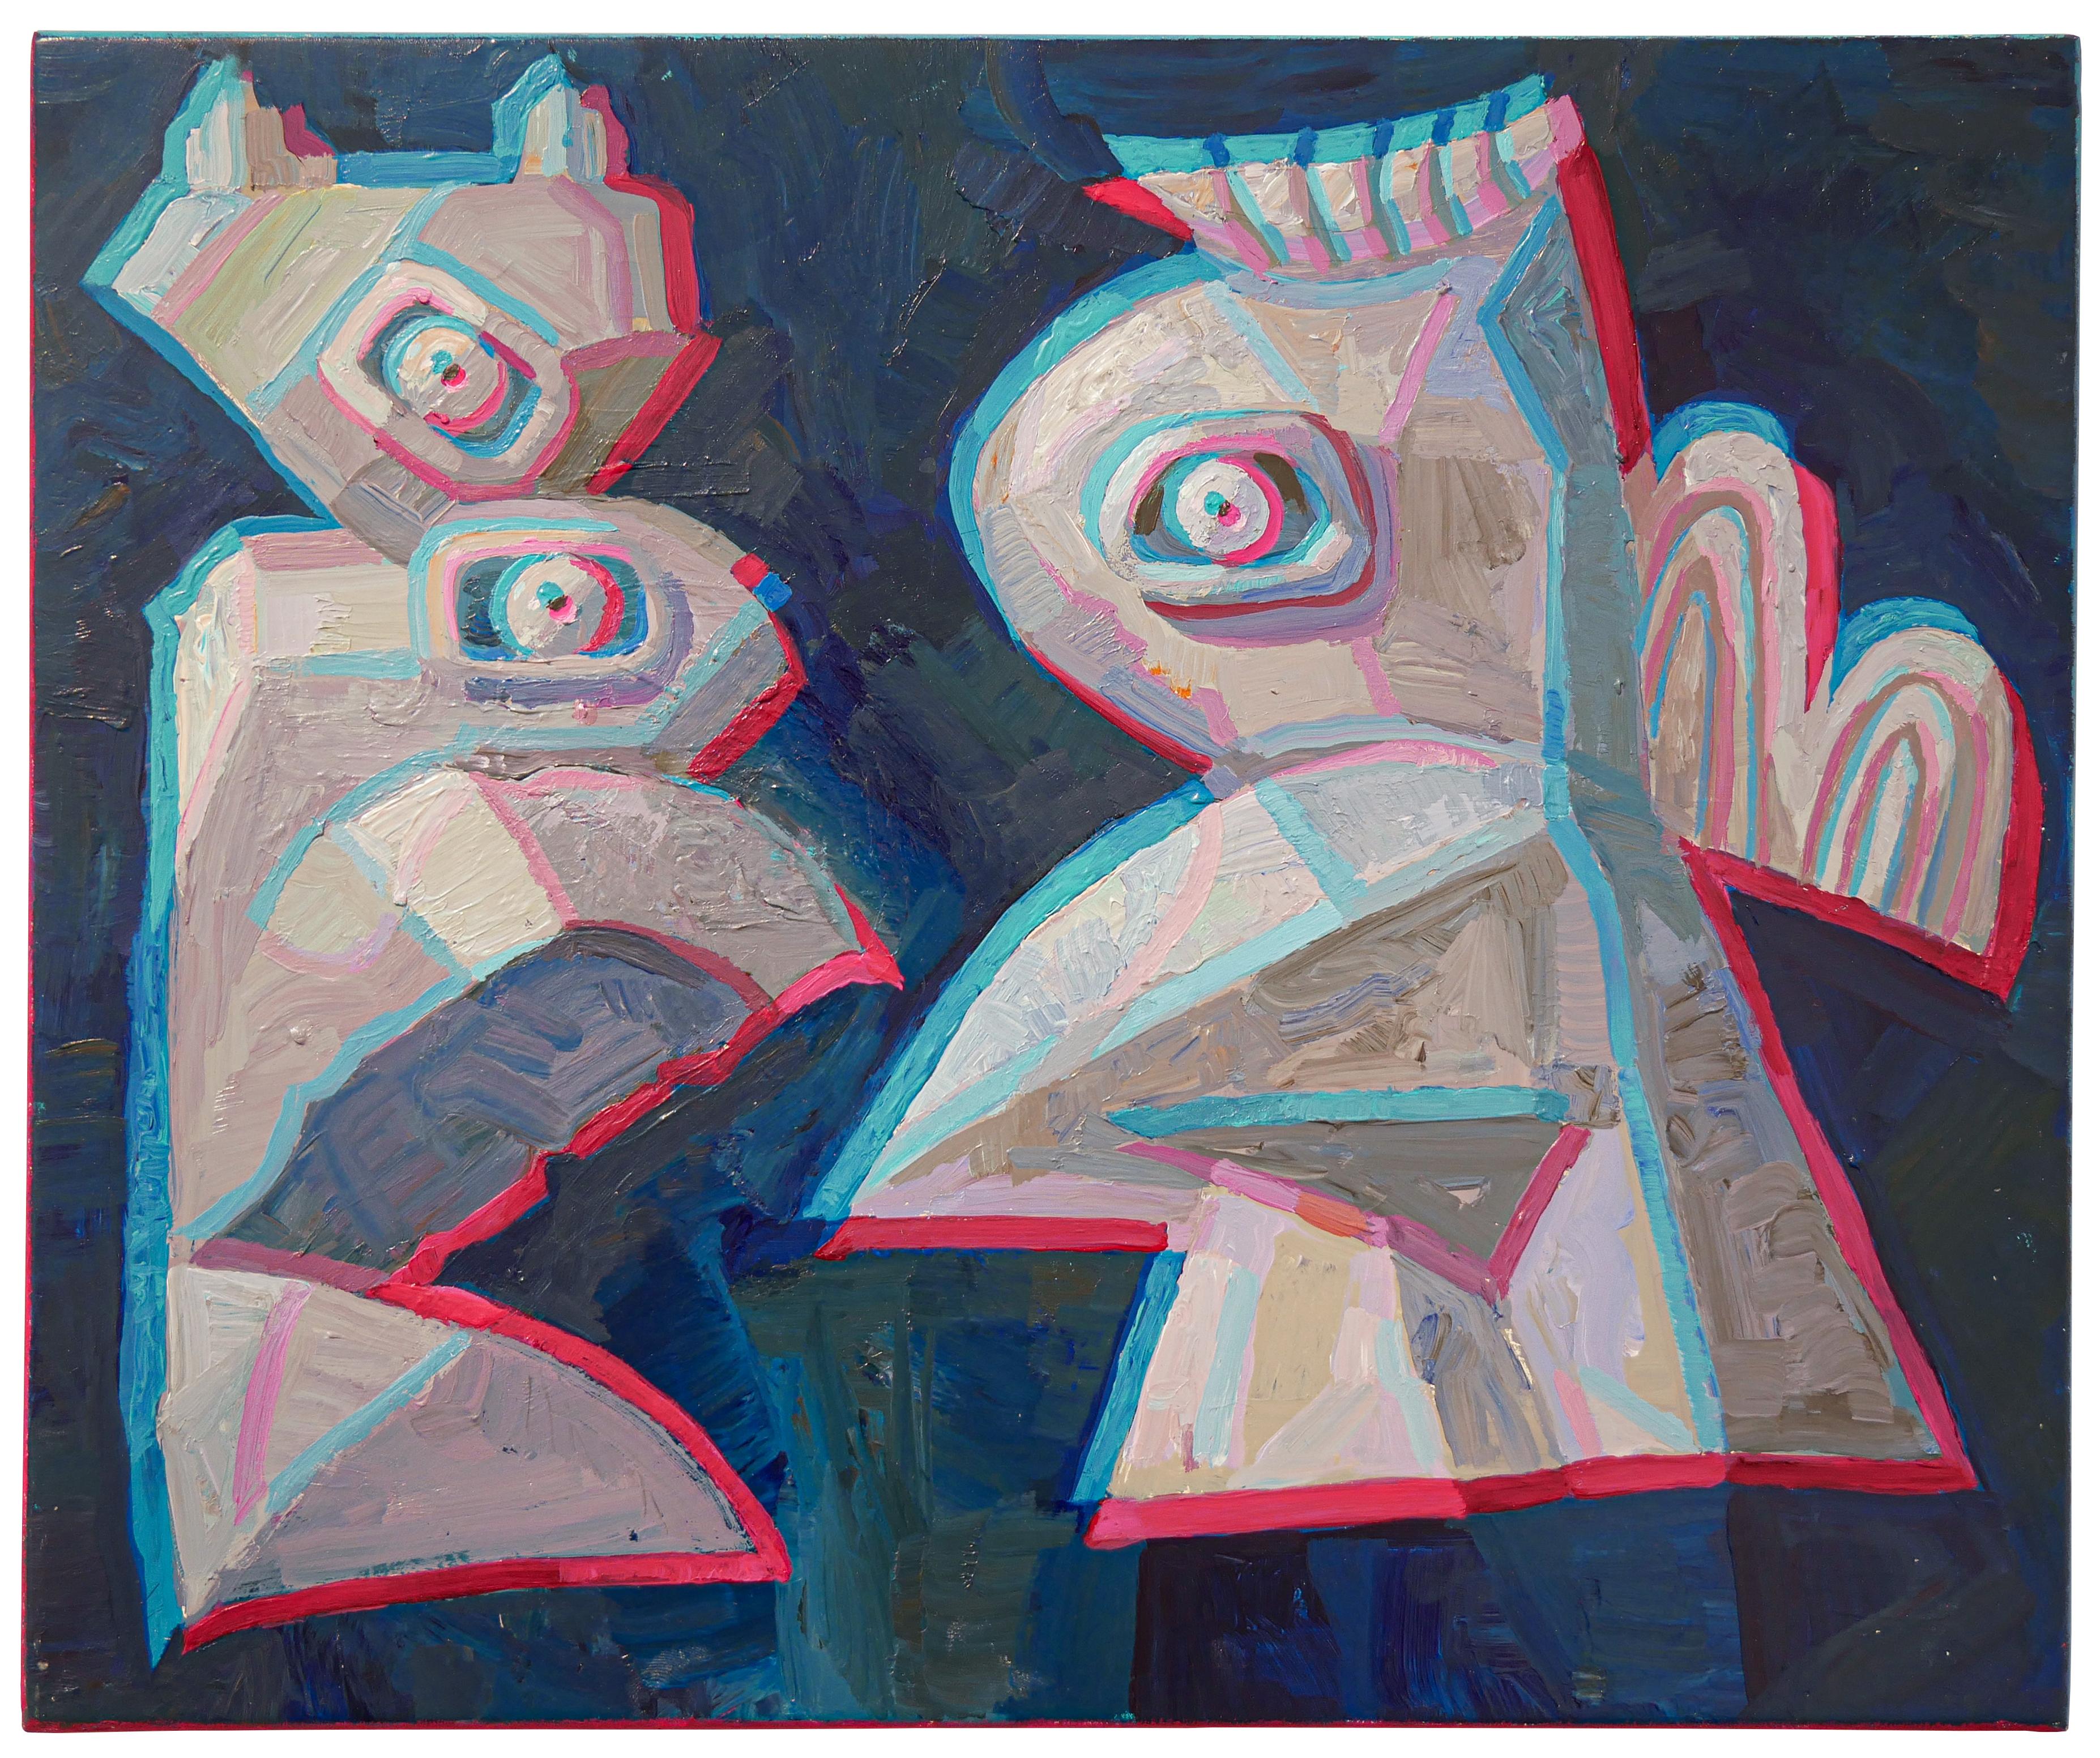 "Untitled" Dark Blue, Neon Pink, and White Anaglyph Painting